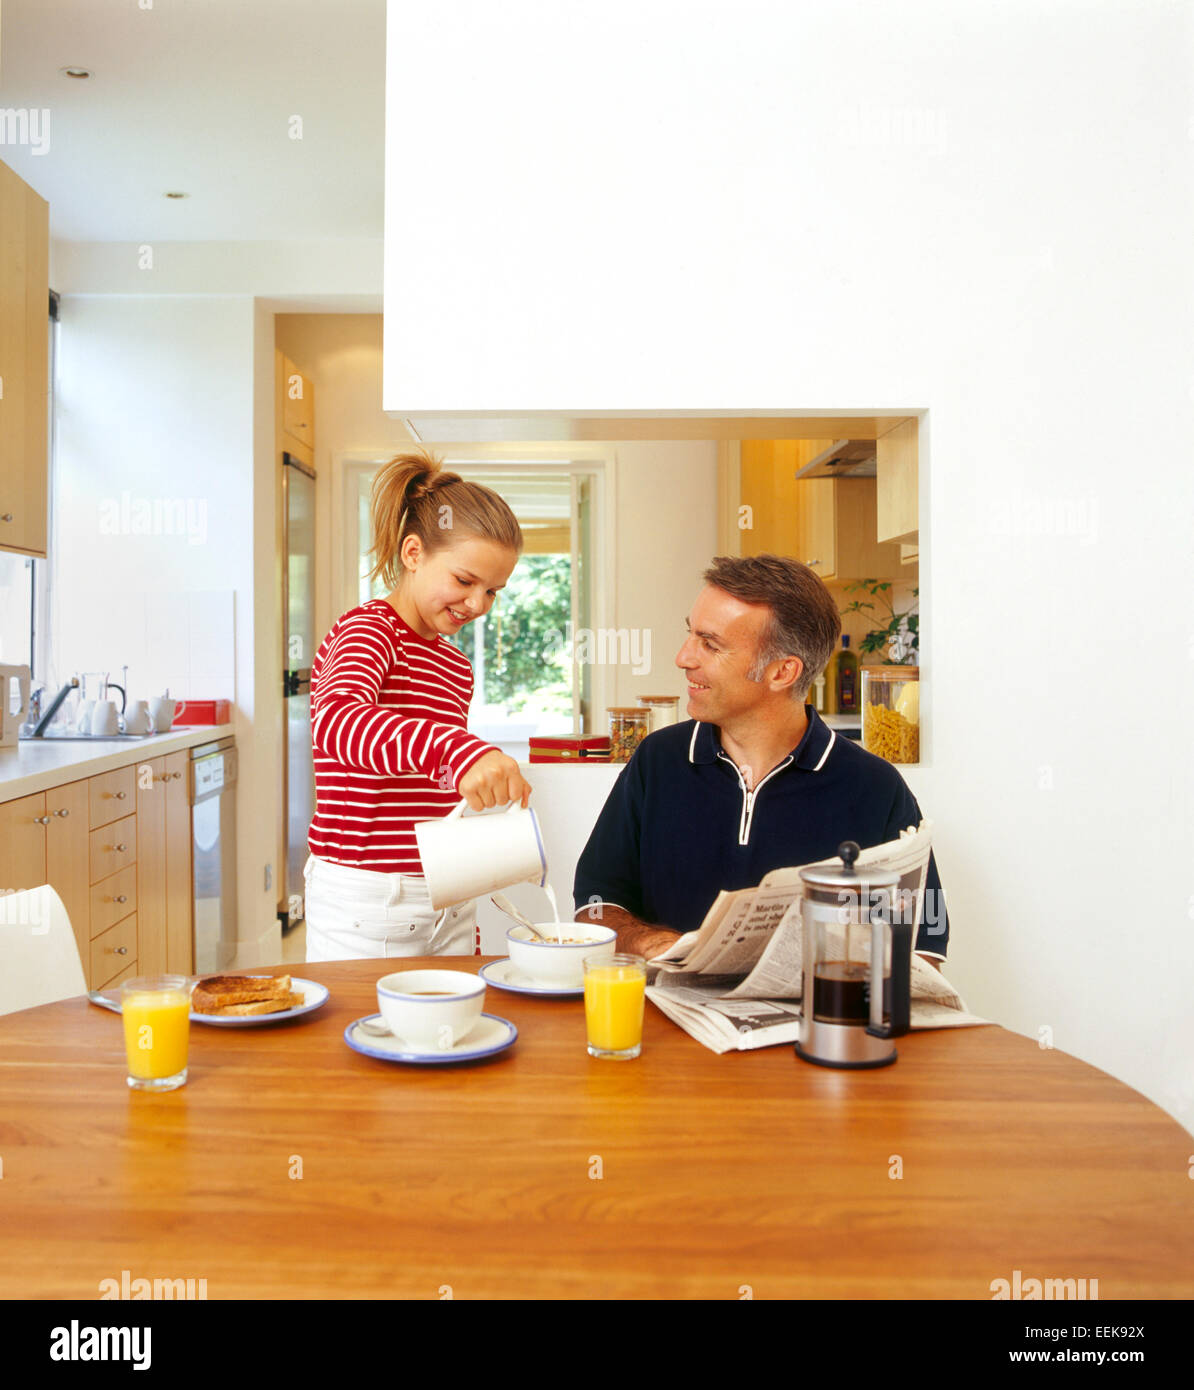 Father and daughter having breakfast together, in kitchen, bonding, laughing while daughter pours milk onto her father's cereal Stock Photo